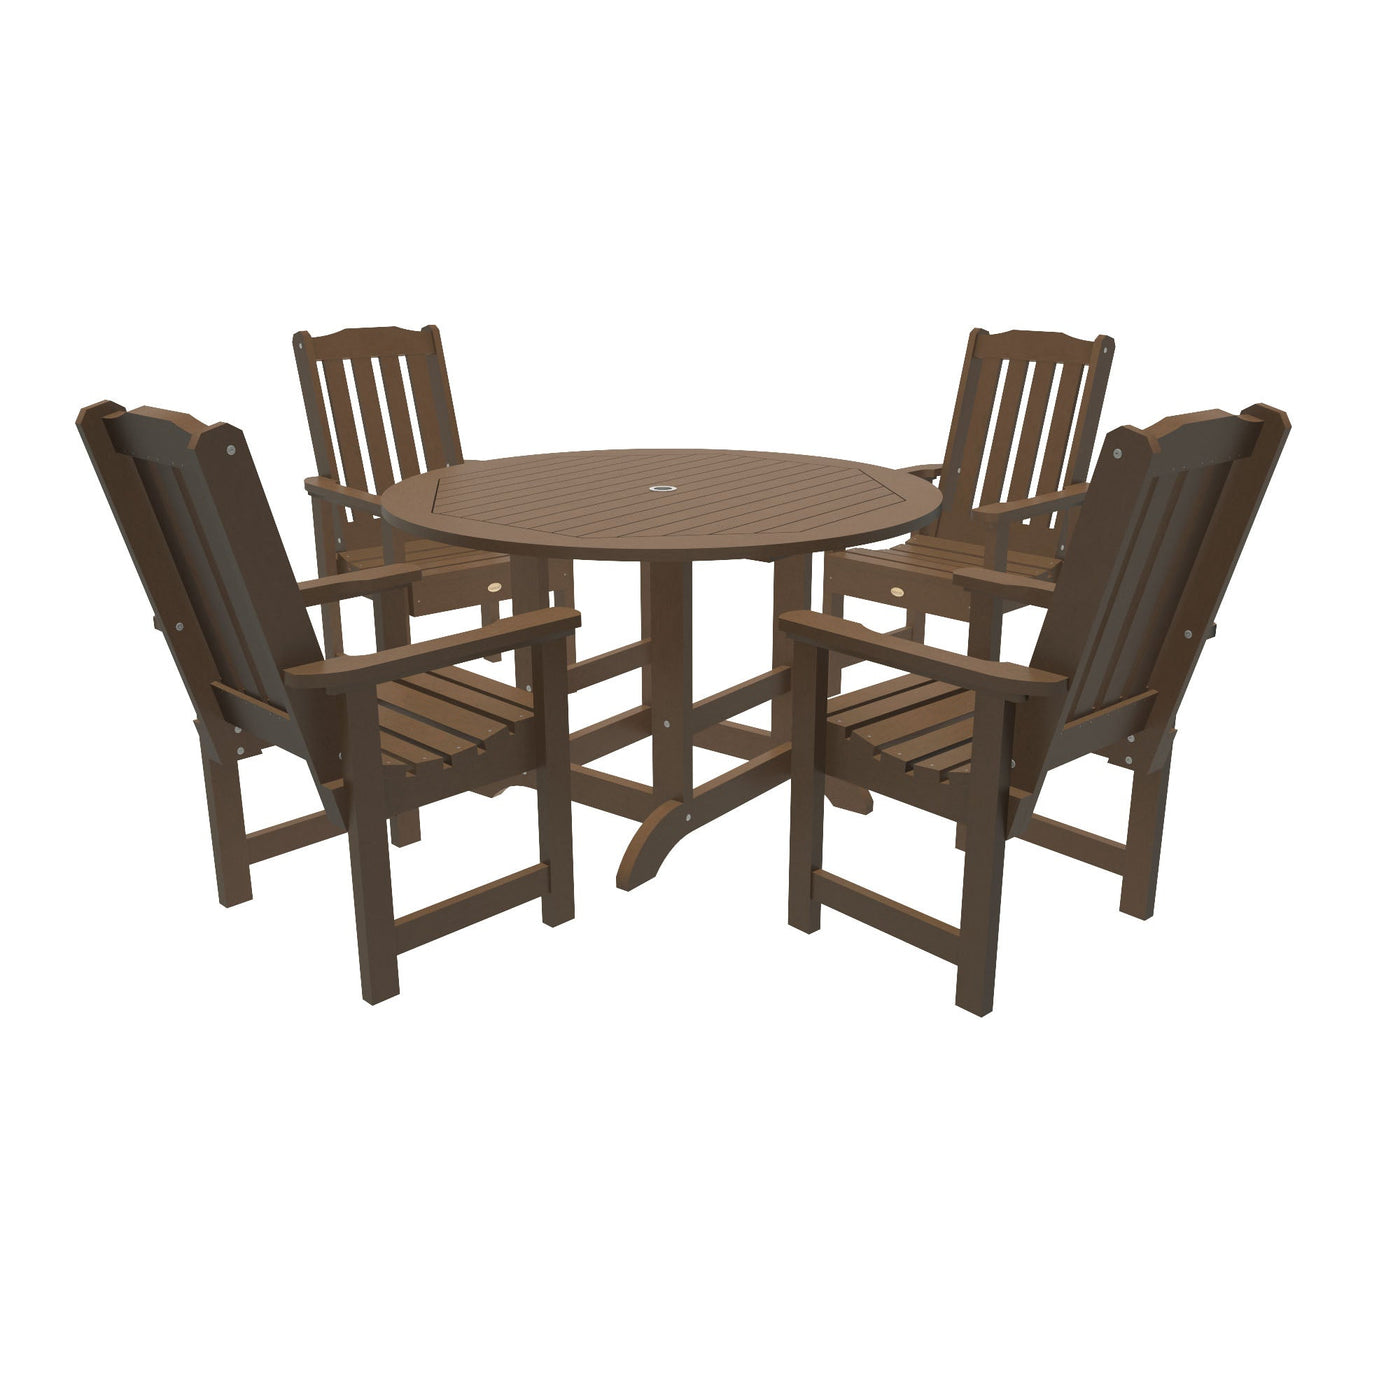 Lehigh 5pc 48in Round Dining Set - Dining Height Dining Highwood USA Weathered Acorn 